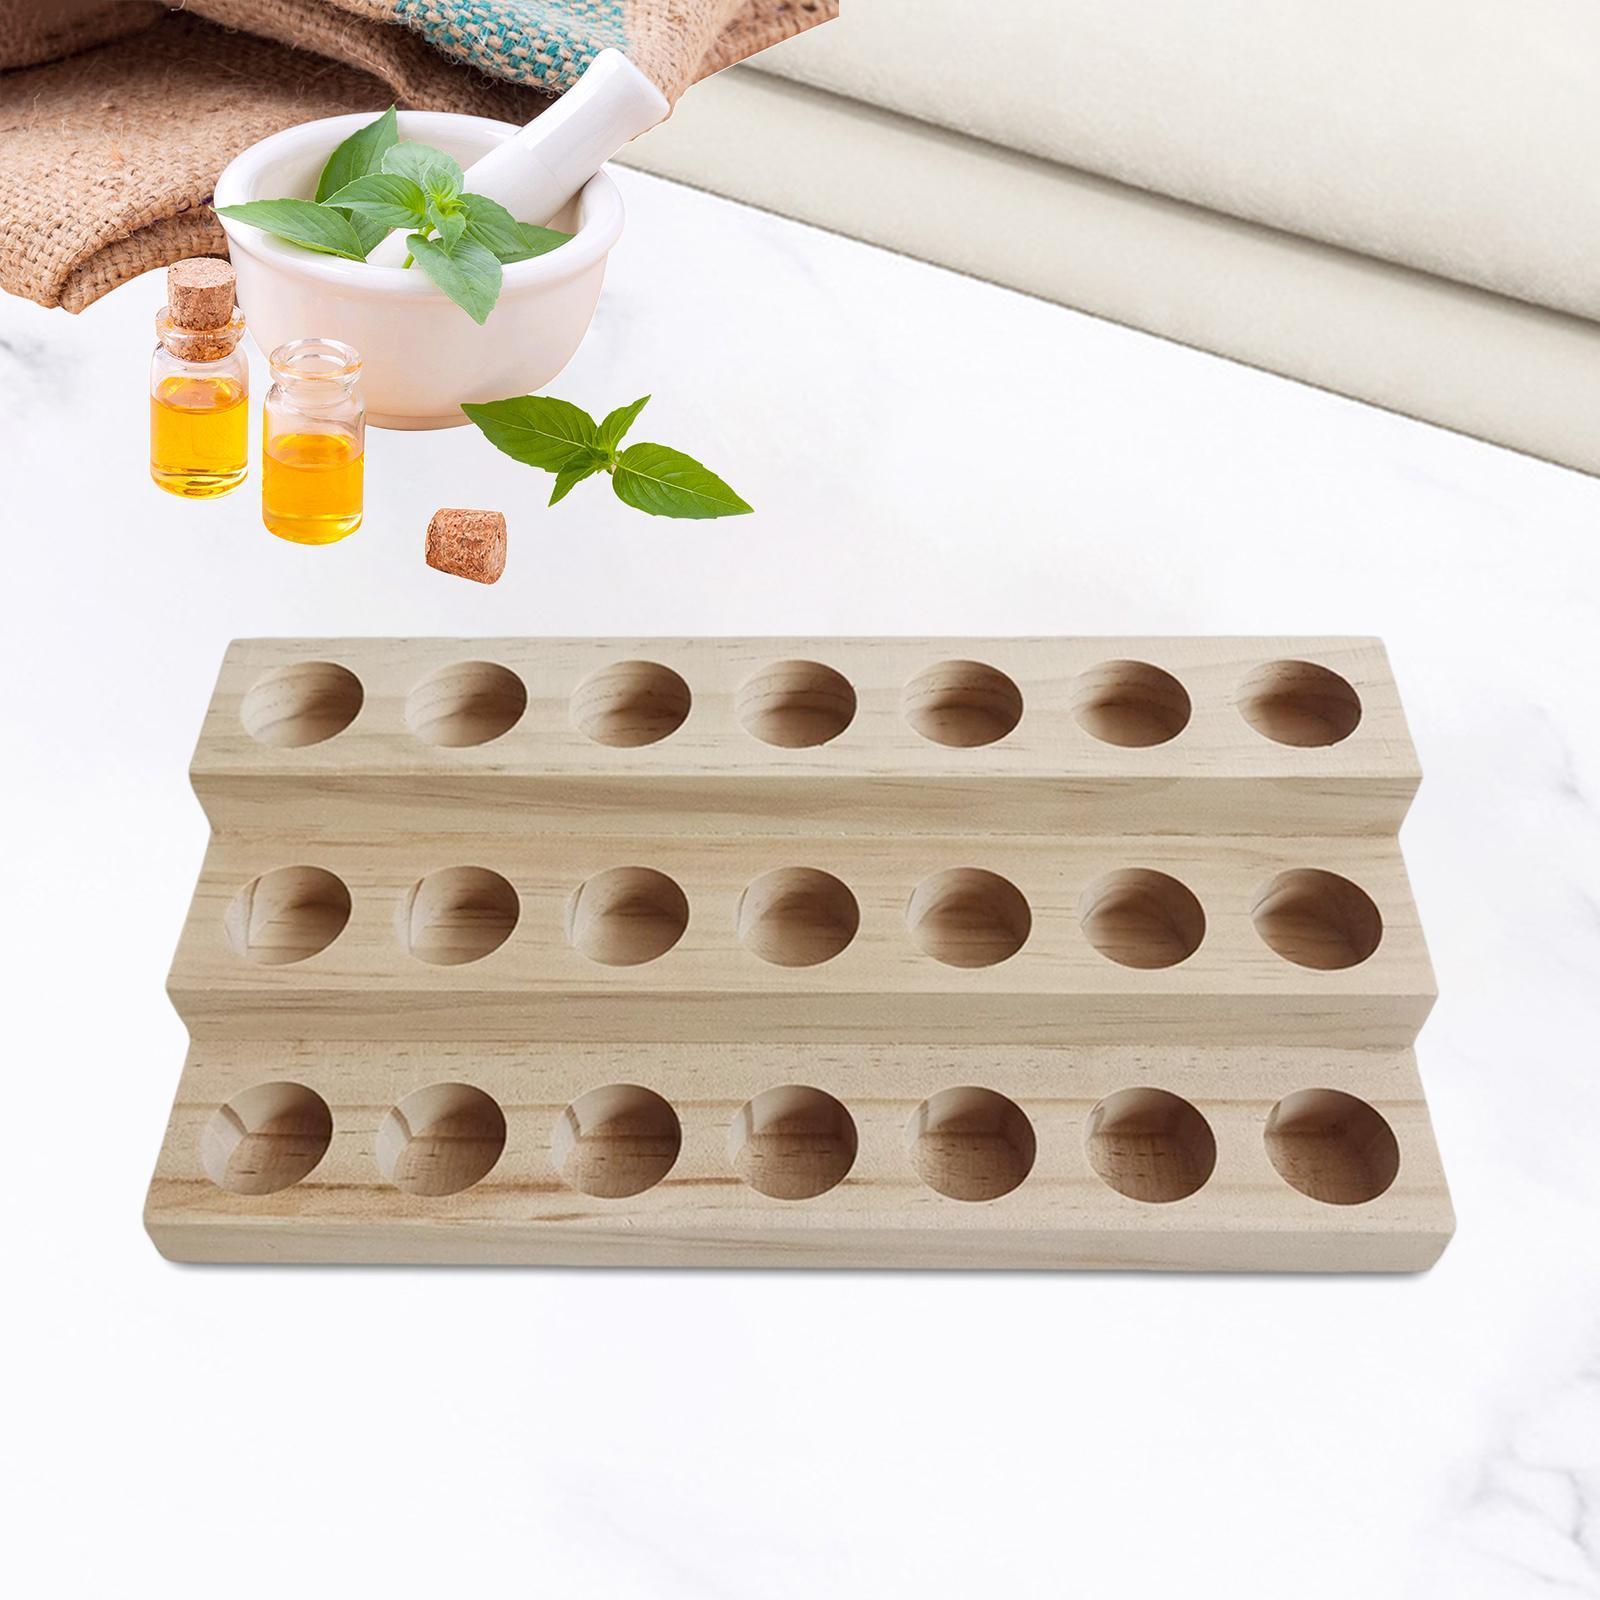 21 Slots Wooden Essential Oil Storage Rack 3 Tier Tray Case Container Display Holder for 10ml Bottles Nail Tabletop Cosmetics Store